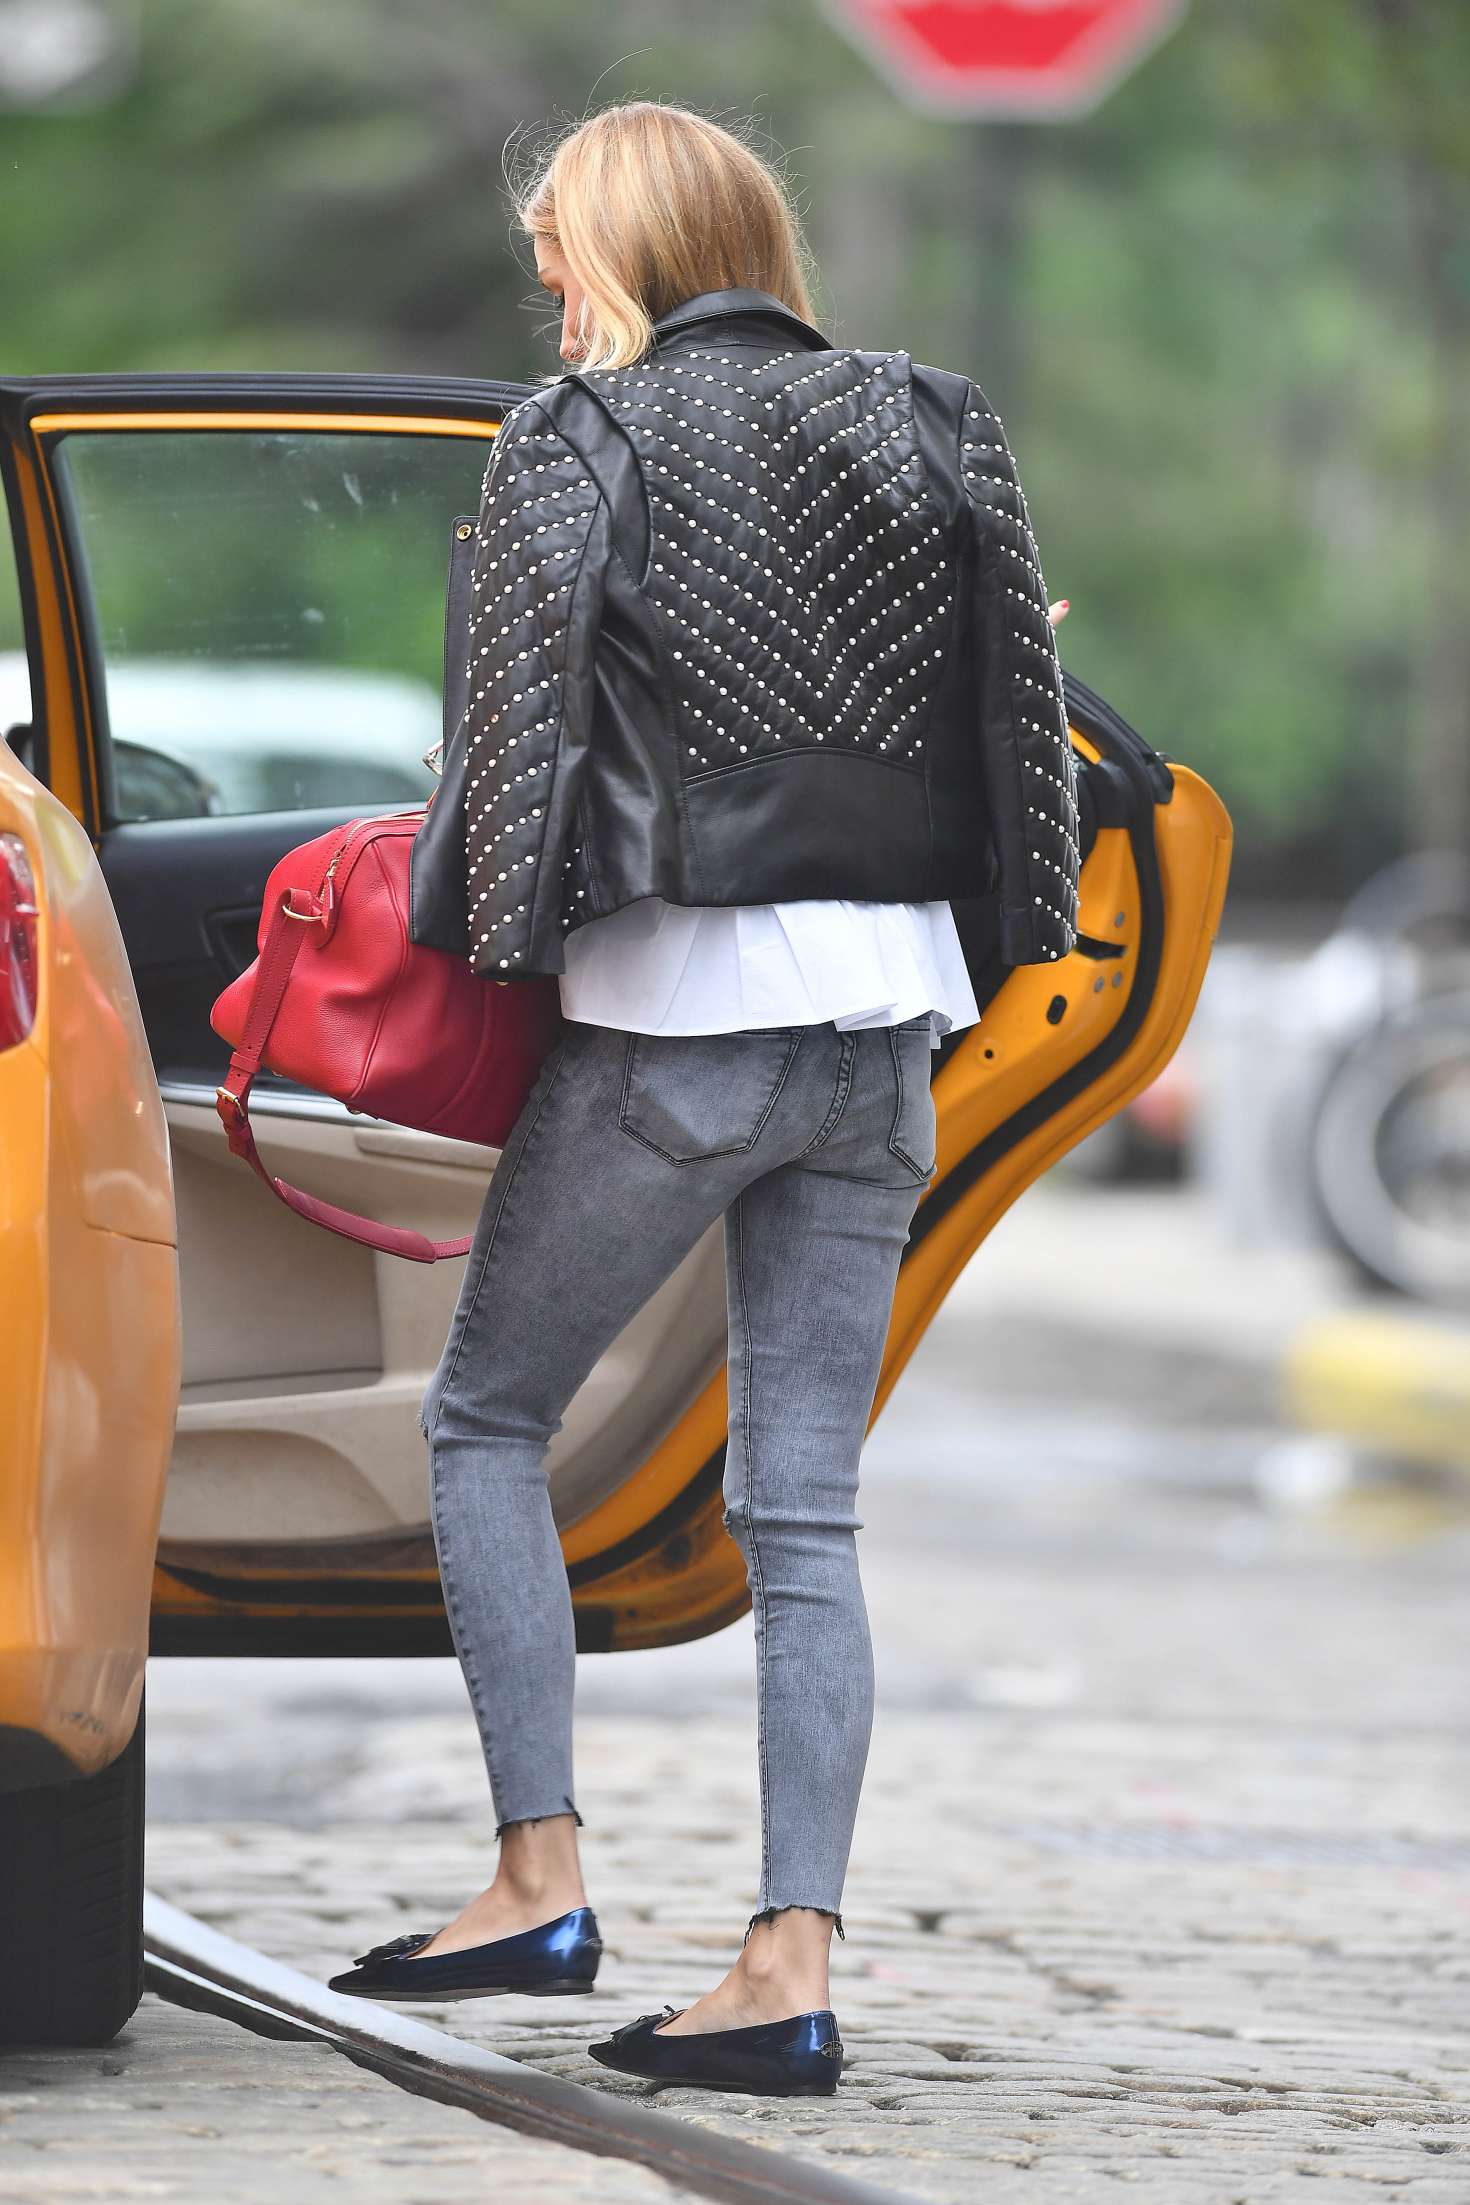 Olivia Palermo hailing a cab in New York